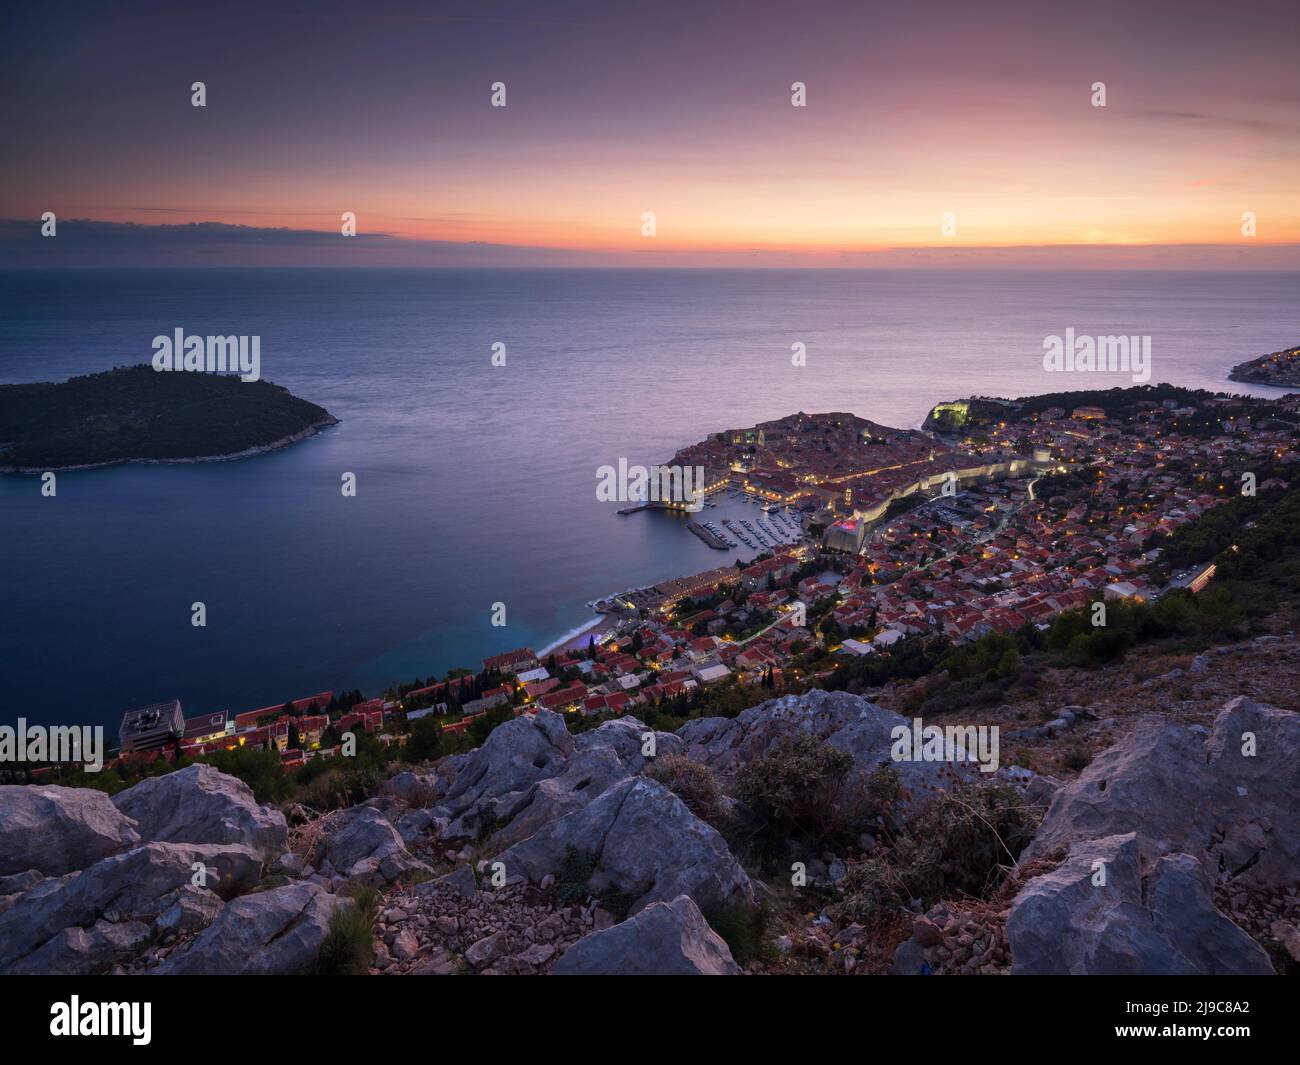 A view over Dubrovnik Old Town at dusk. Stock Photo